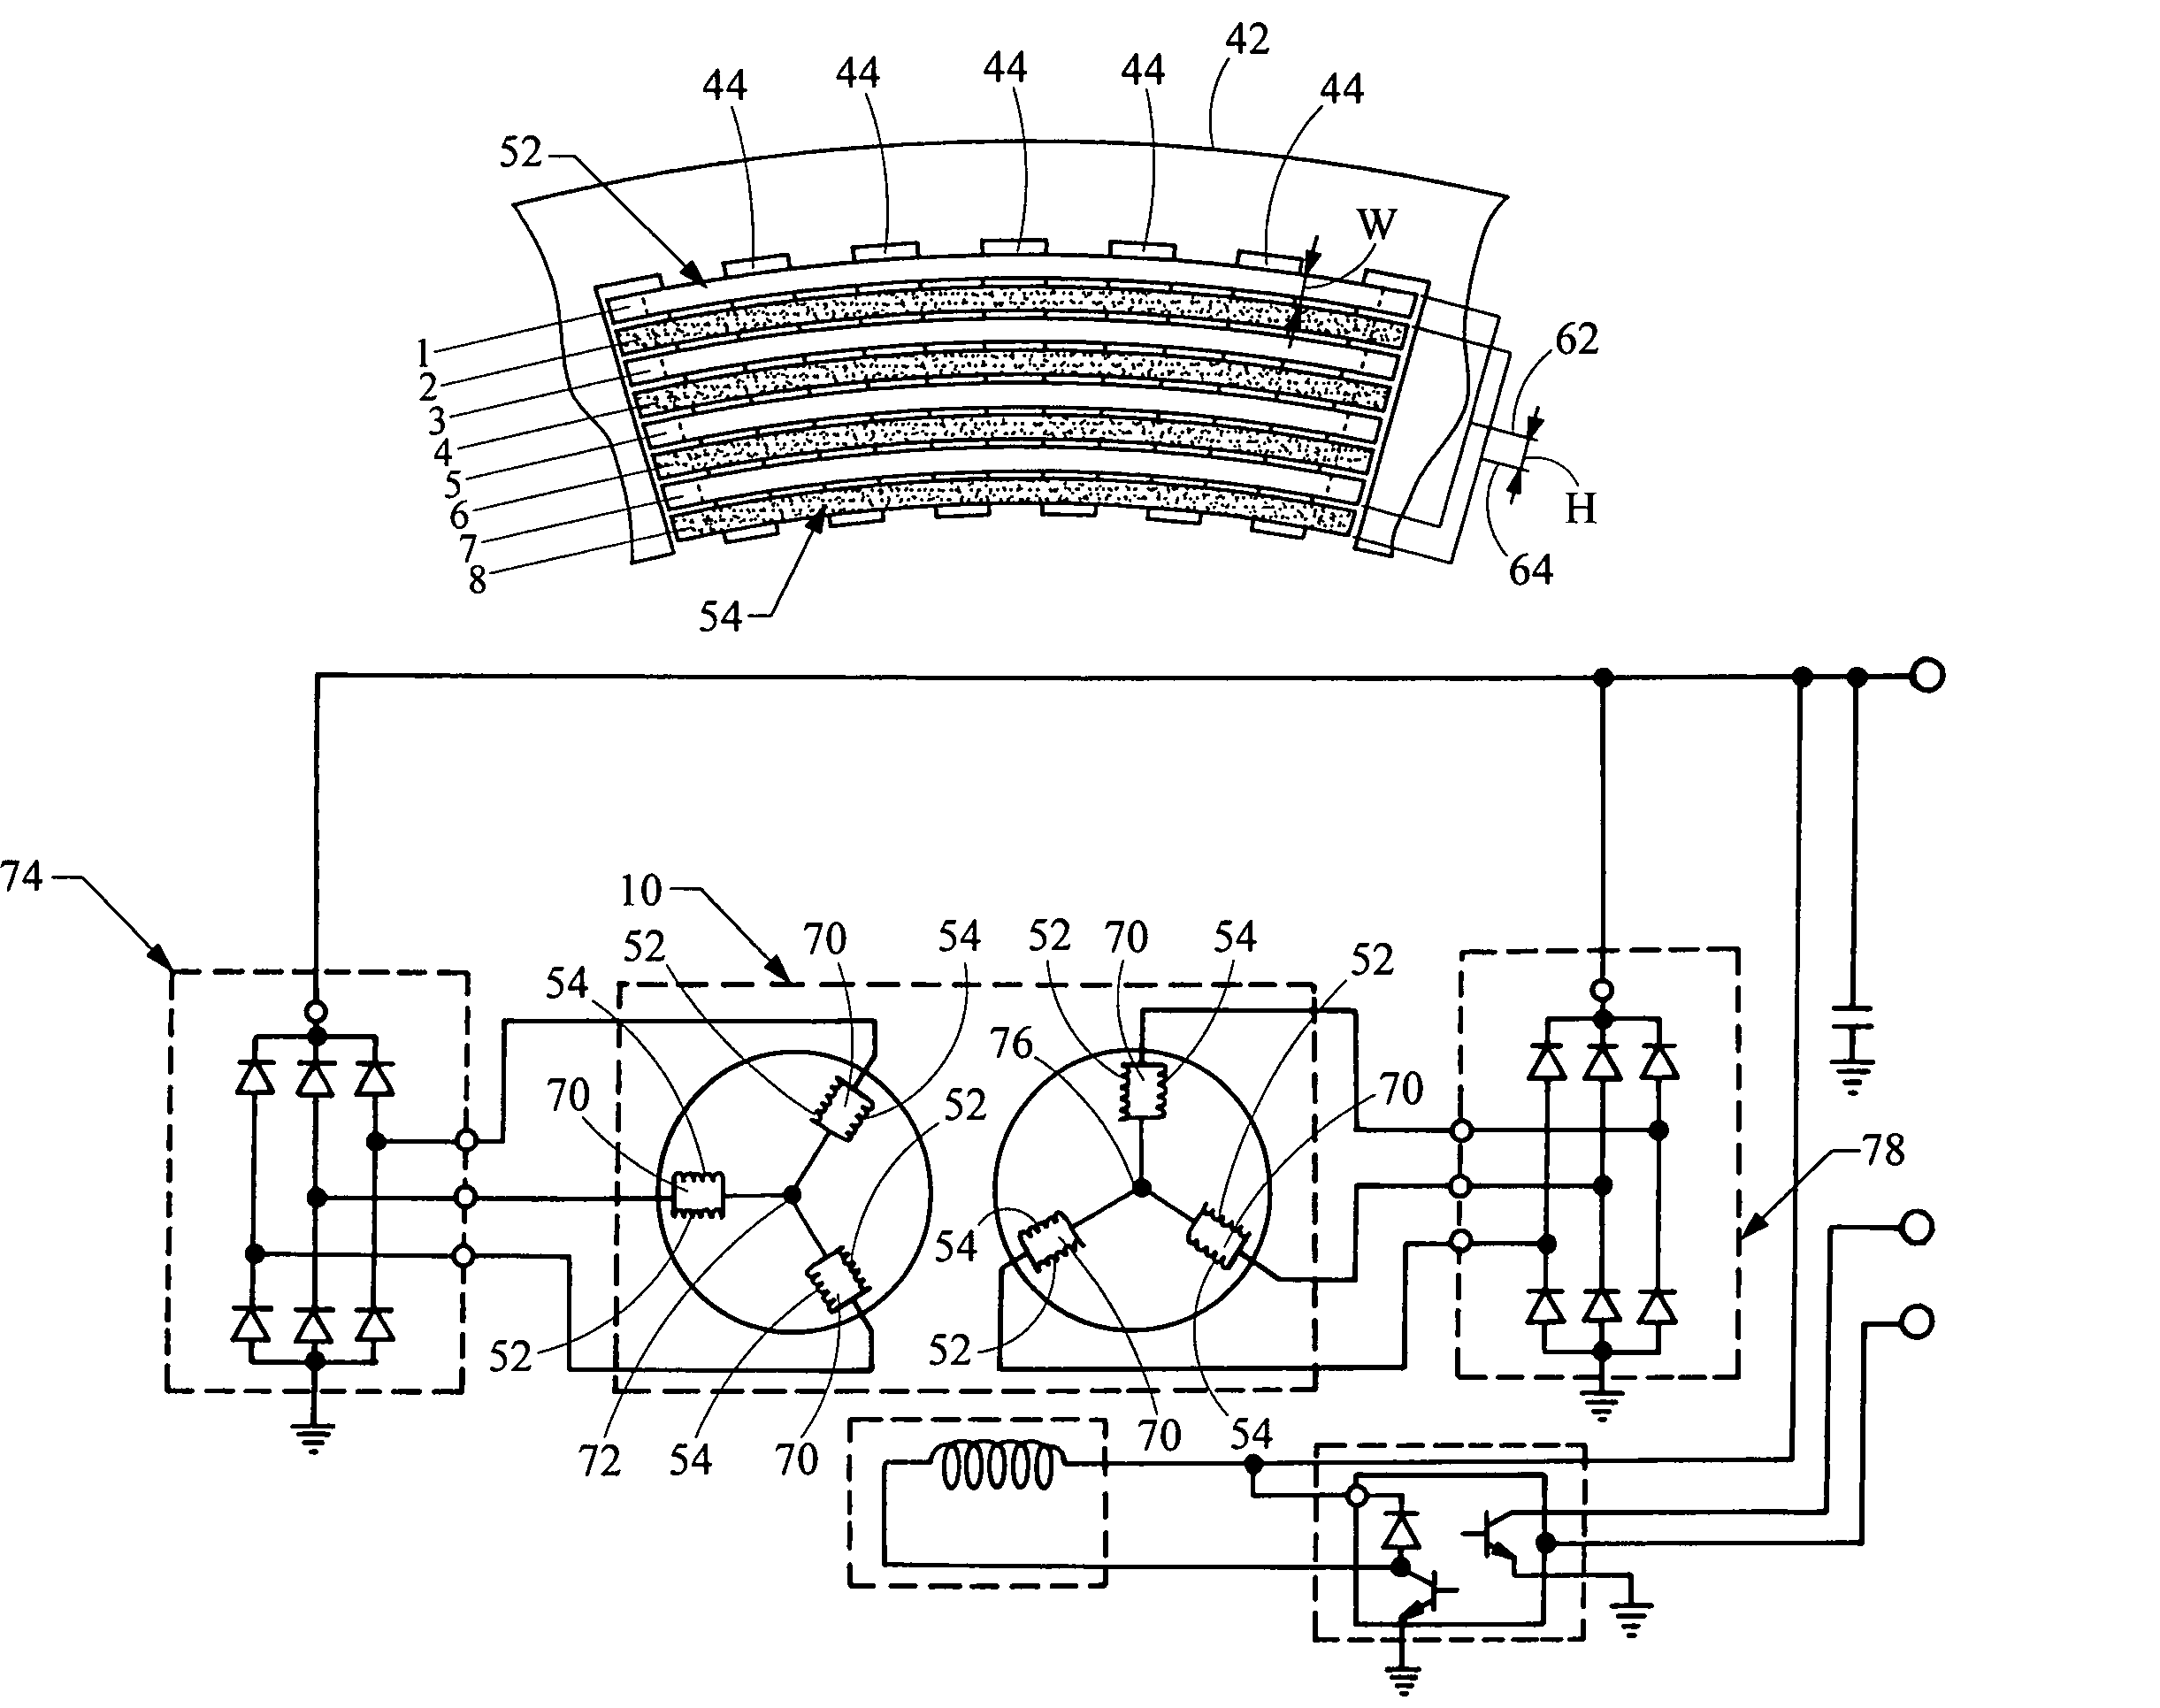 Electrical machine having a stator winding with a plurality of filars